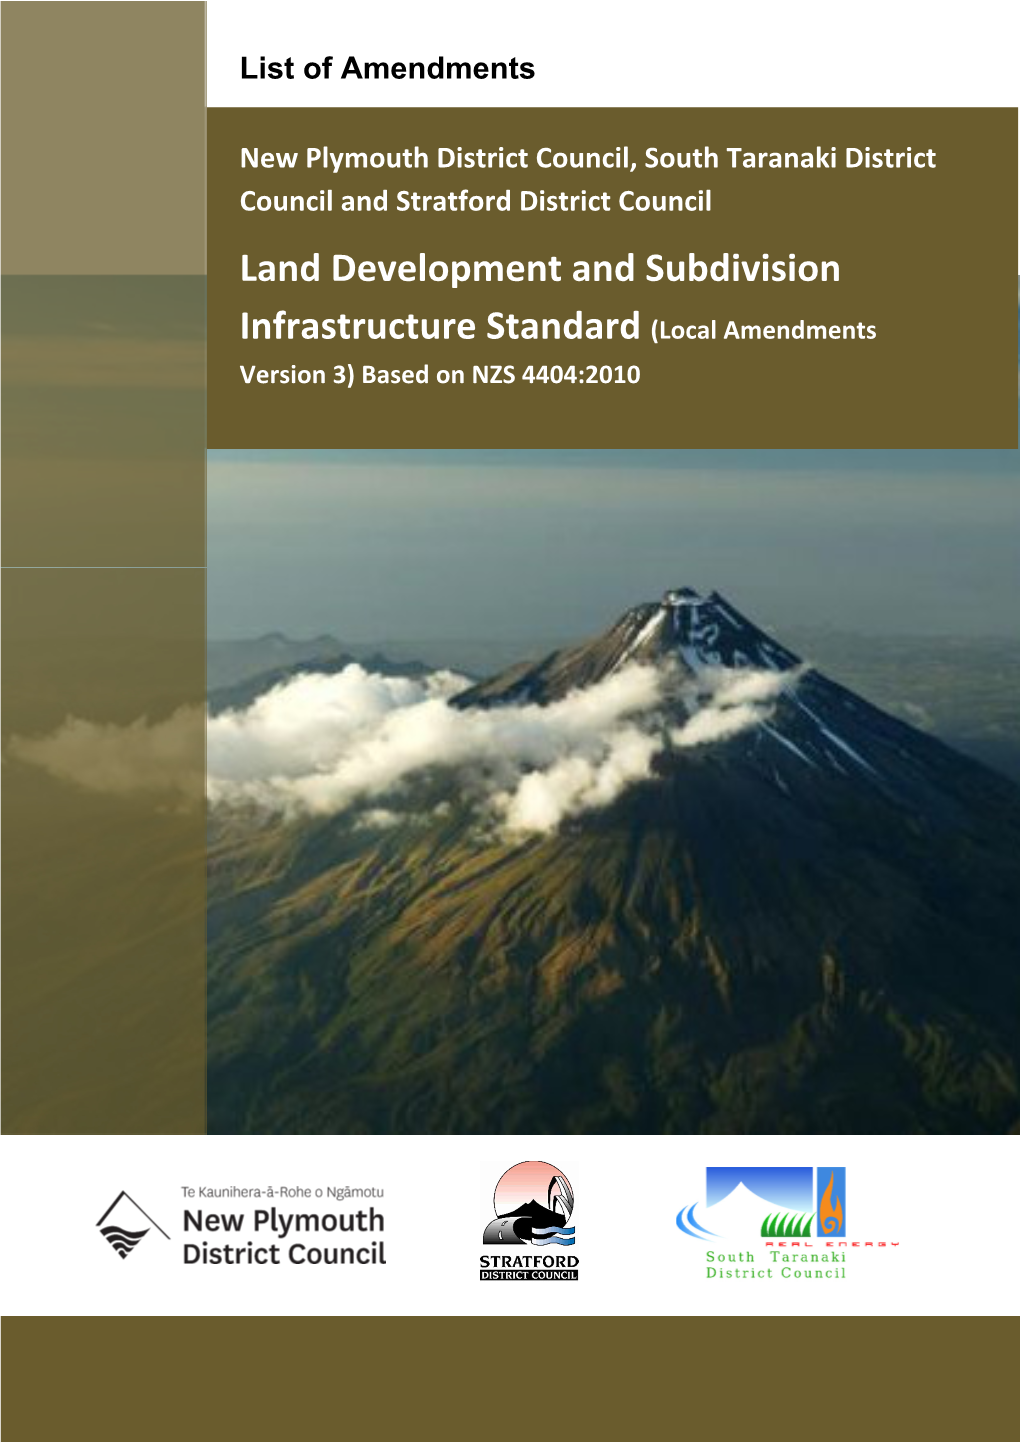 Land Development and Subdivision Infrastructure Standard (Local Amendments Version 3) Based on NZS 4404:2010